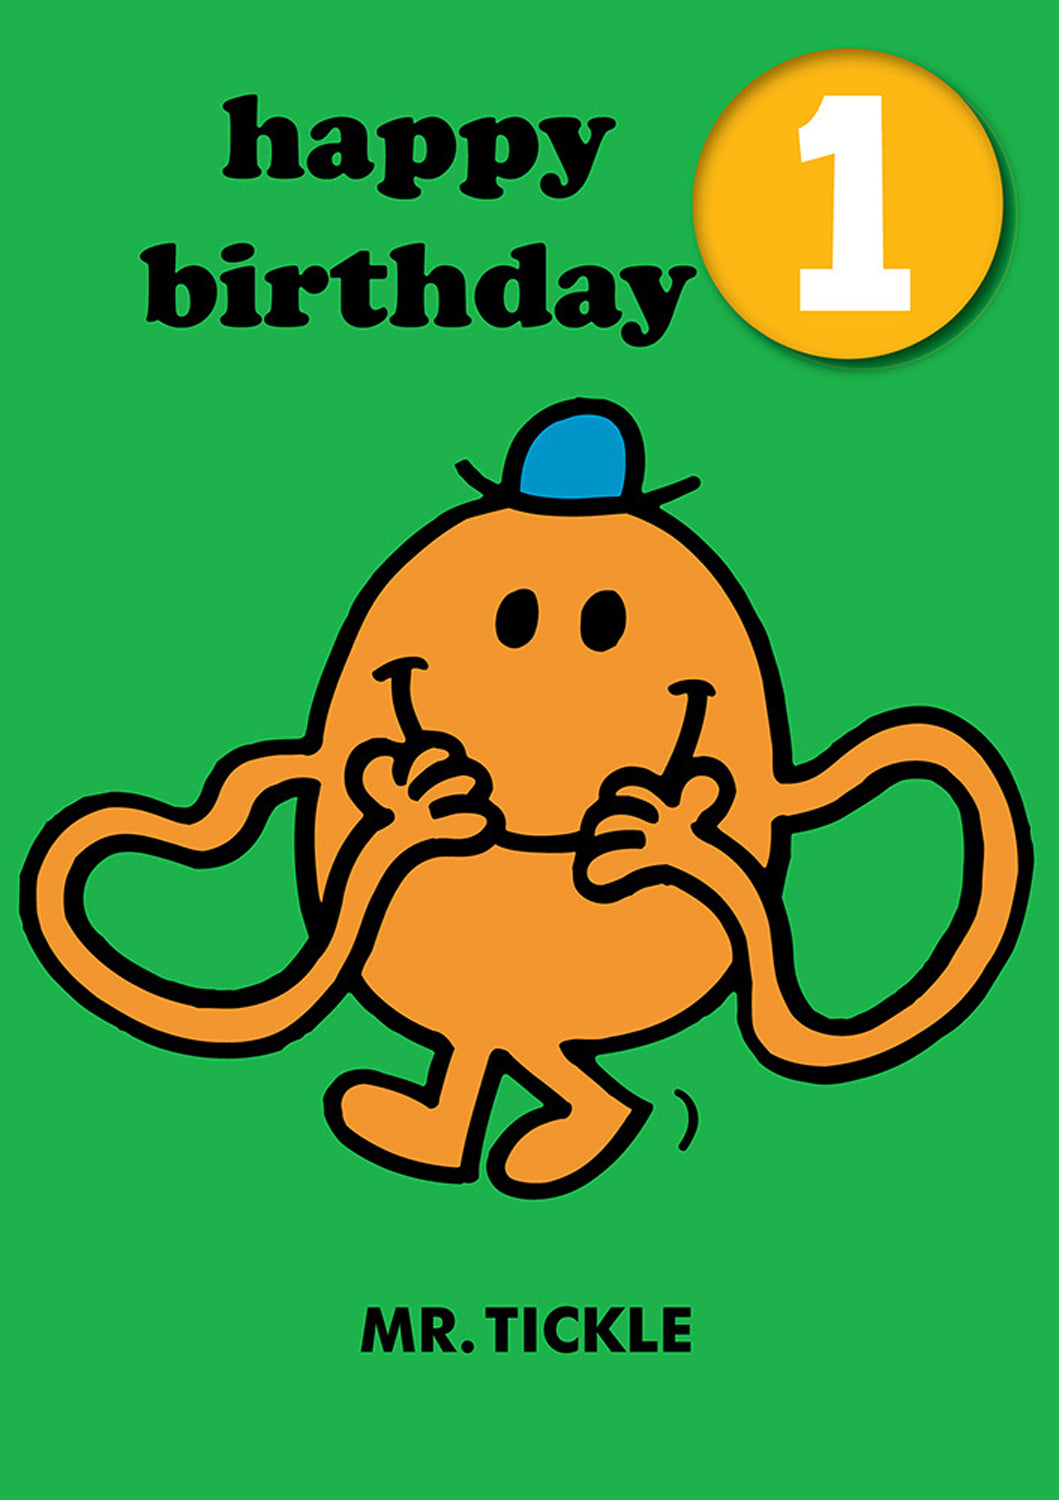 Greeting Card: Mr. Men and Little Miss - Mr. Tickle Age 1 Badge